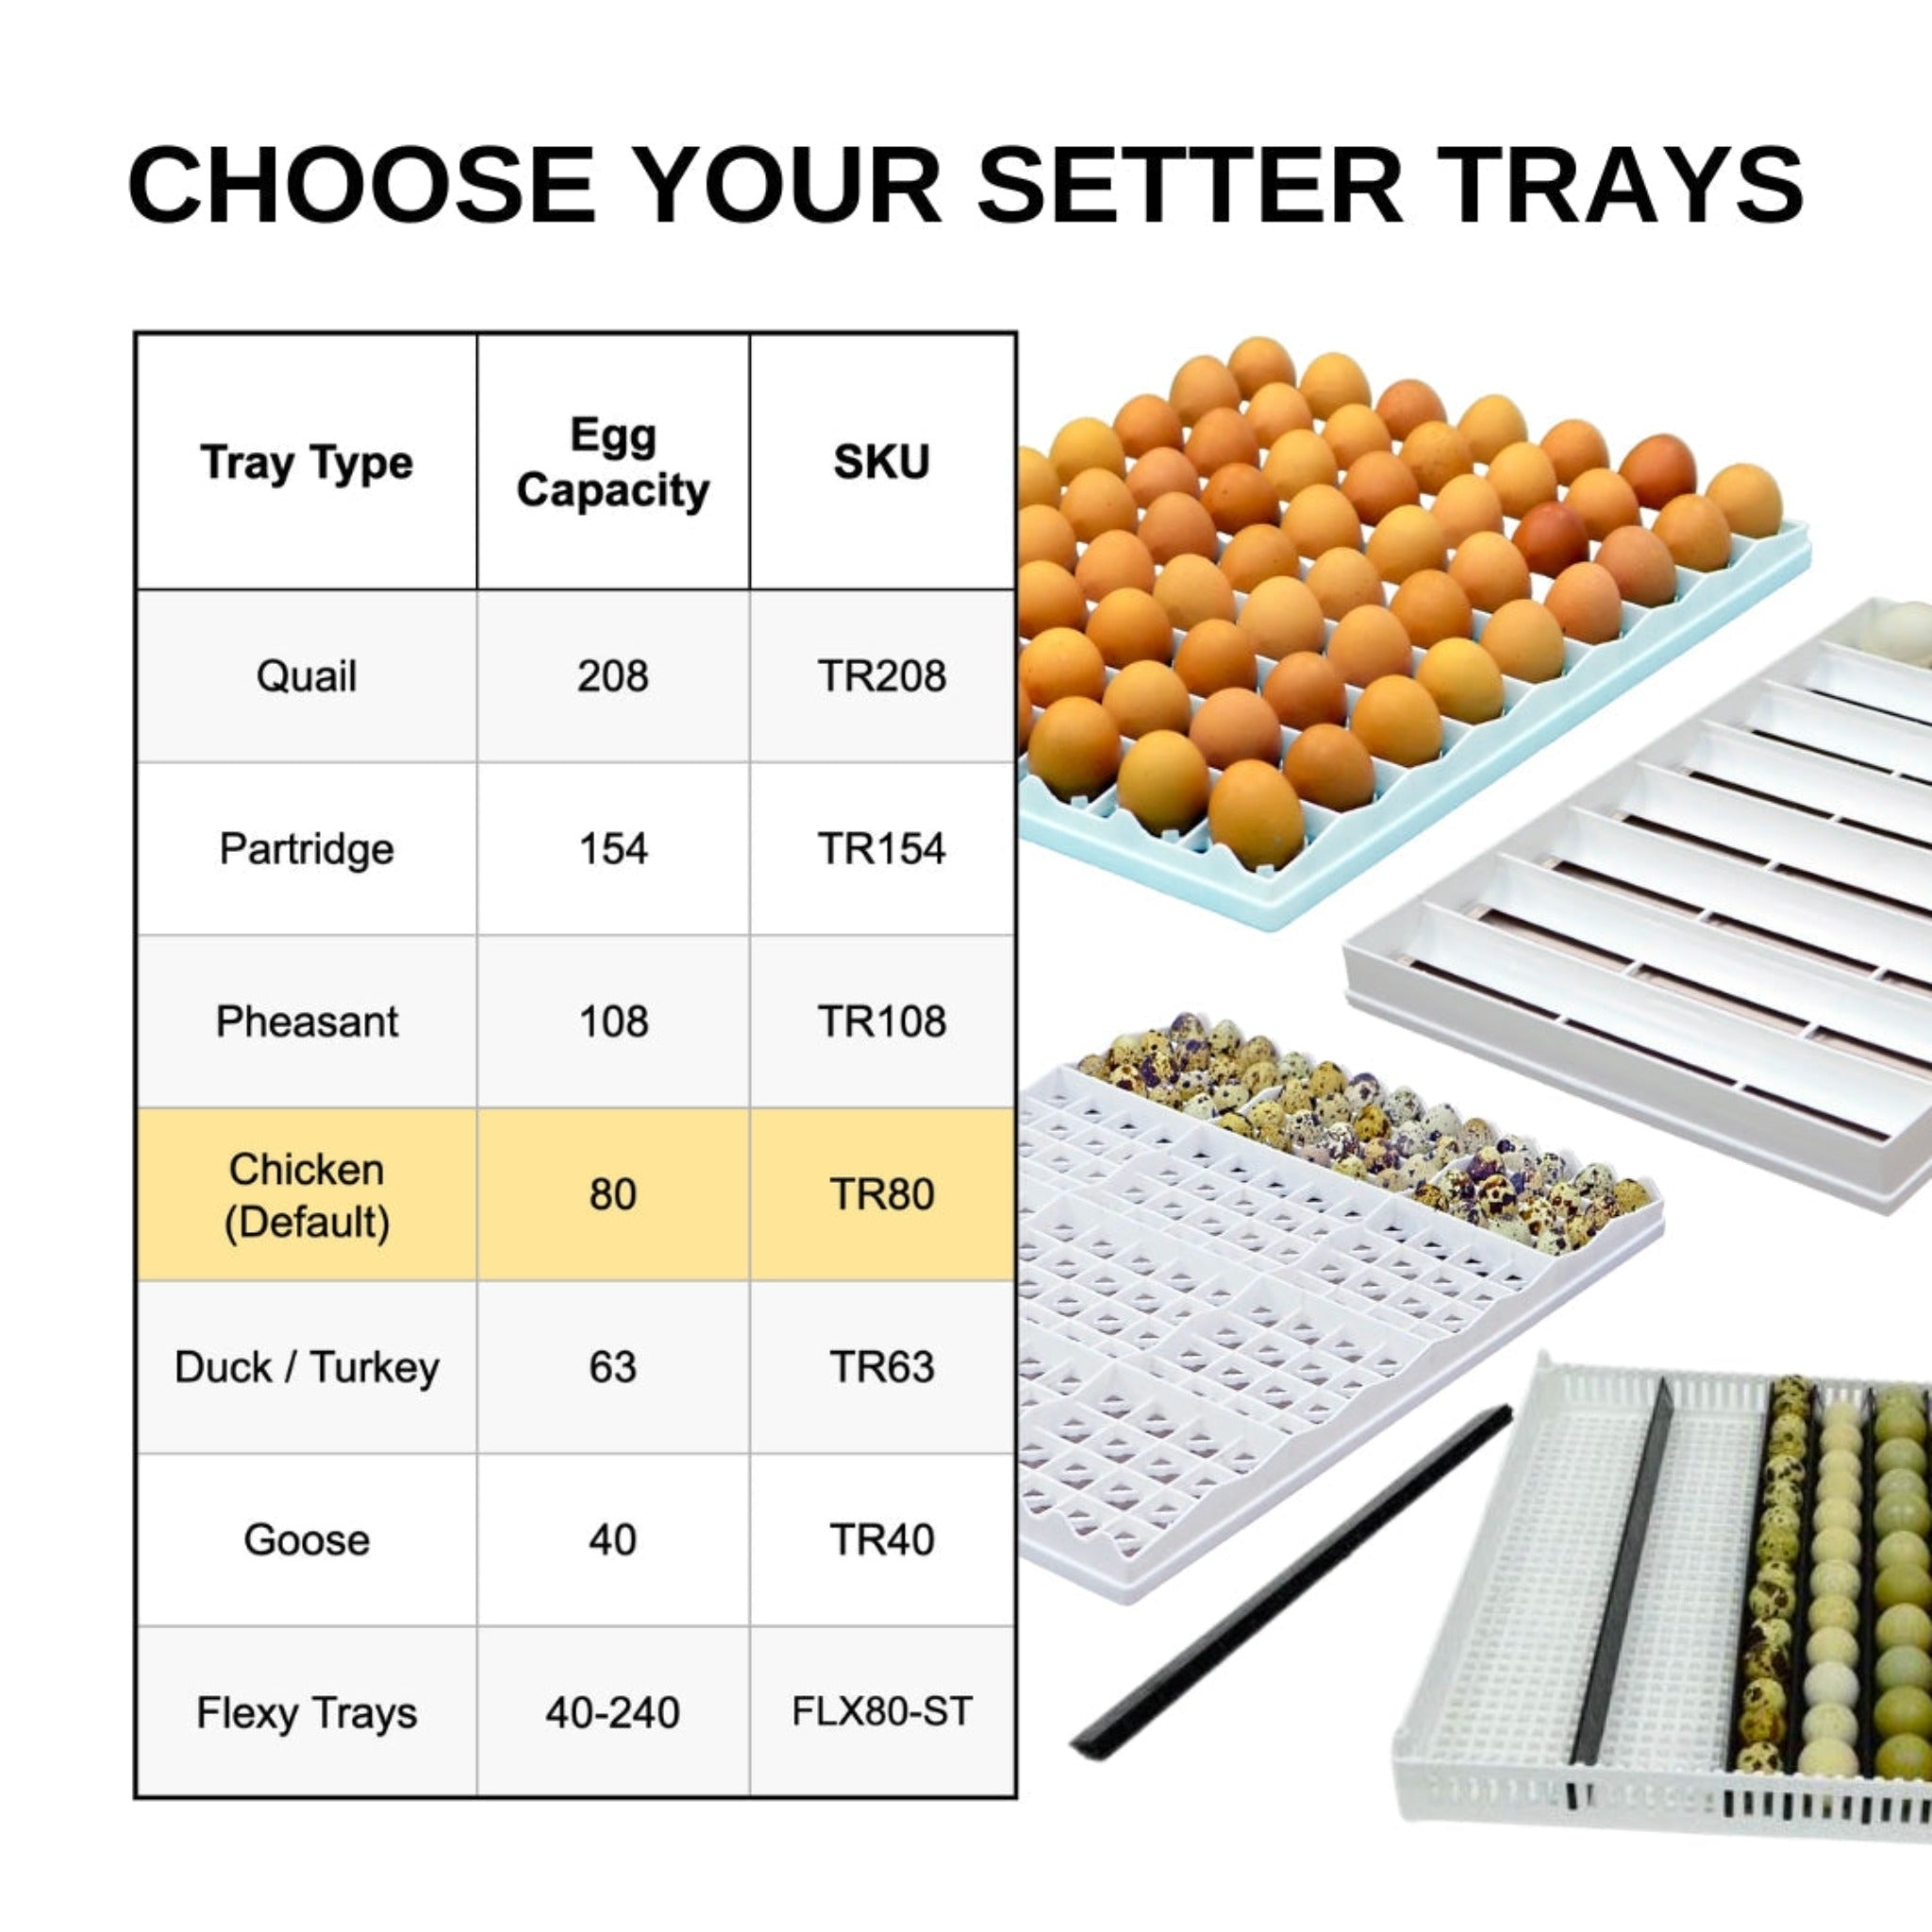 Infographic showing the different models of setter trays available. Comes default with Chicken egg trays, but can vary depending on hatching needs. Quail, Partridge, Pheasant, Duck/Turkey, Goose or Flexy Trays shown as options.